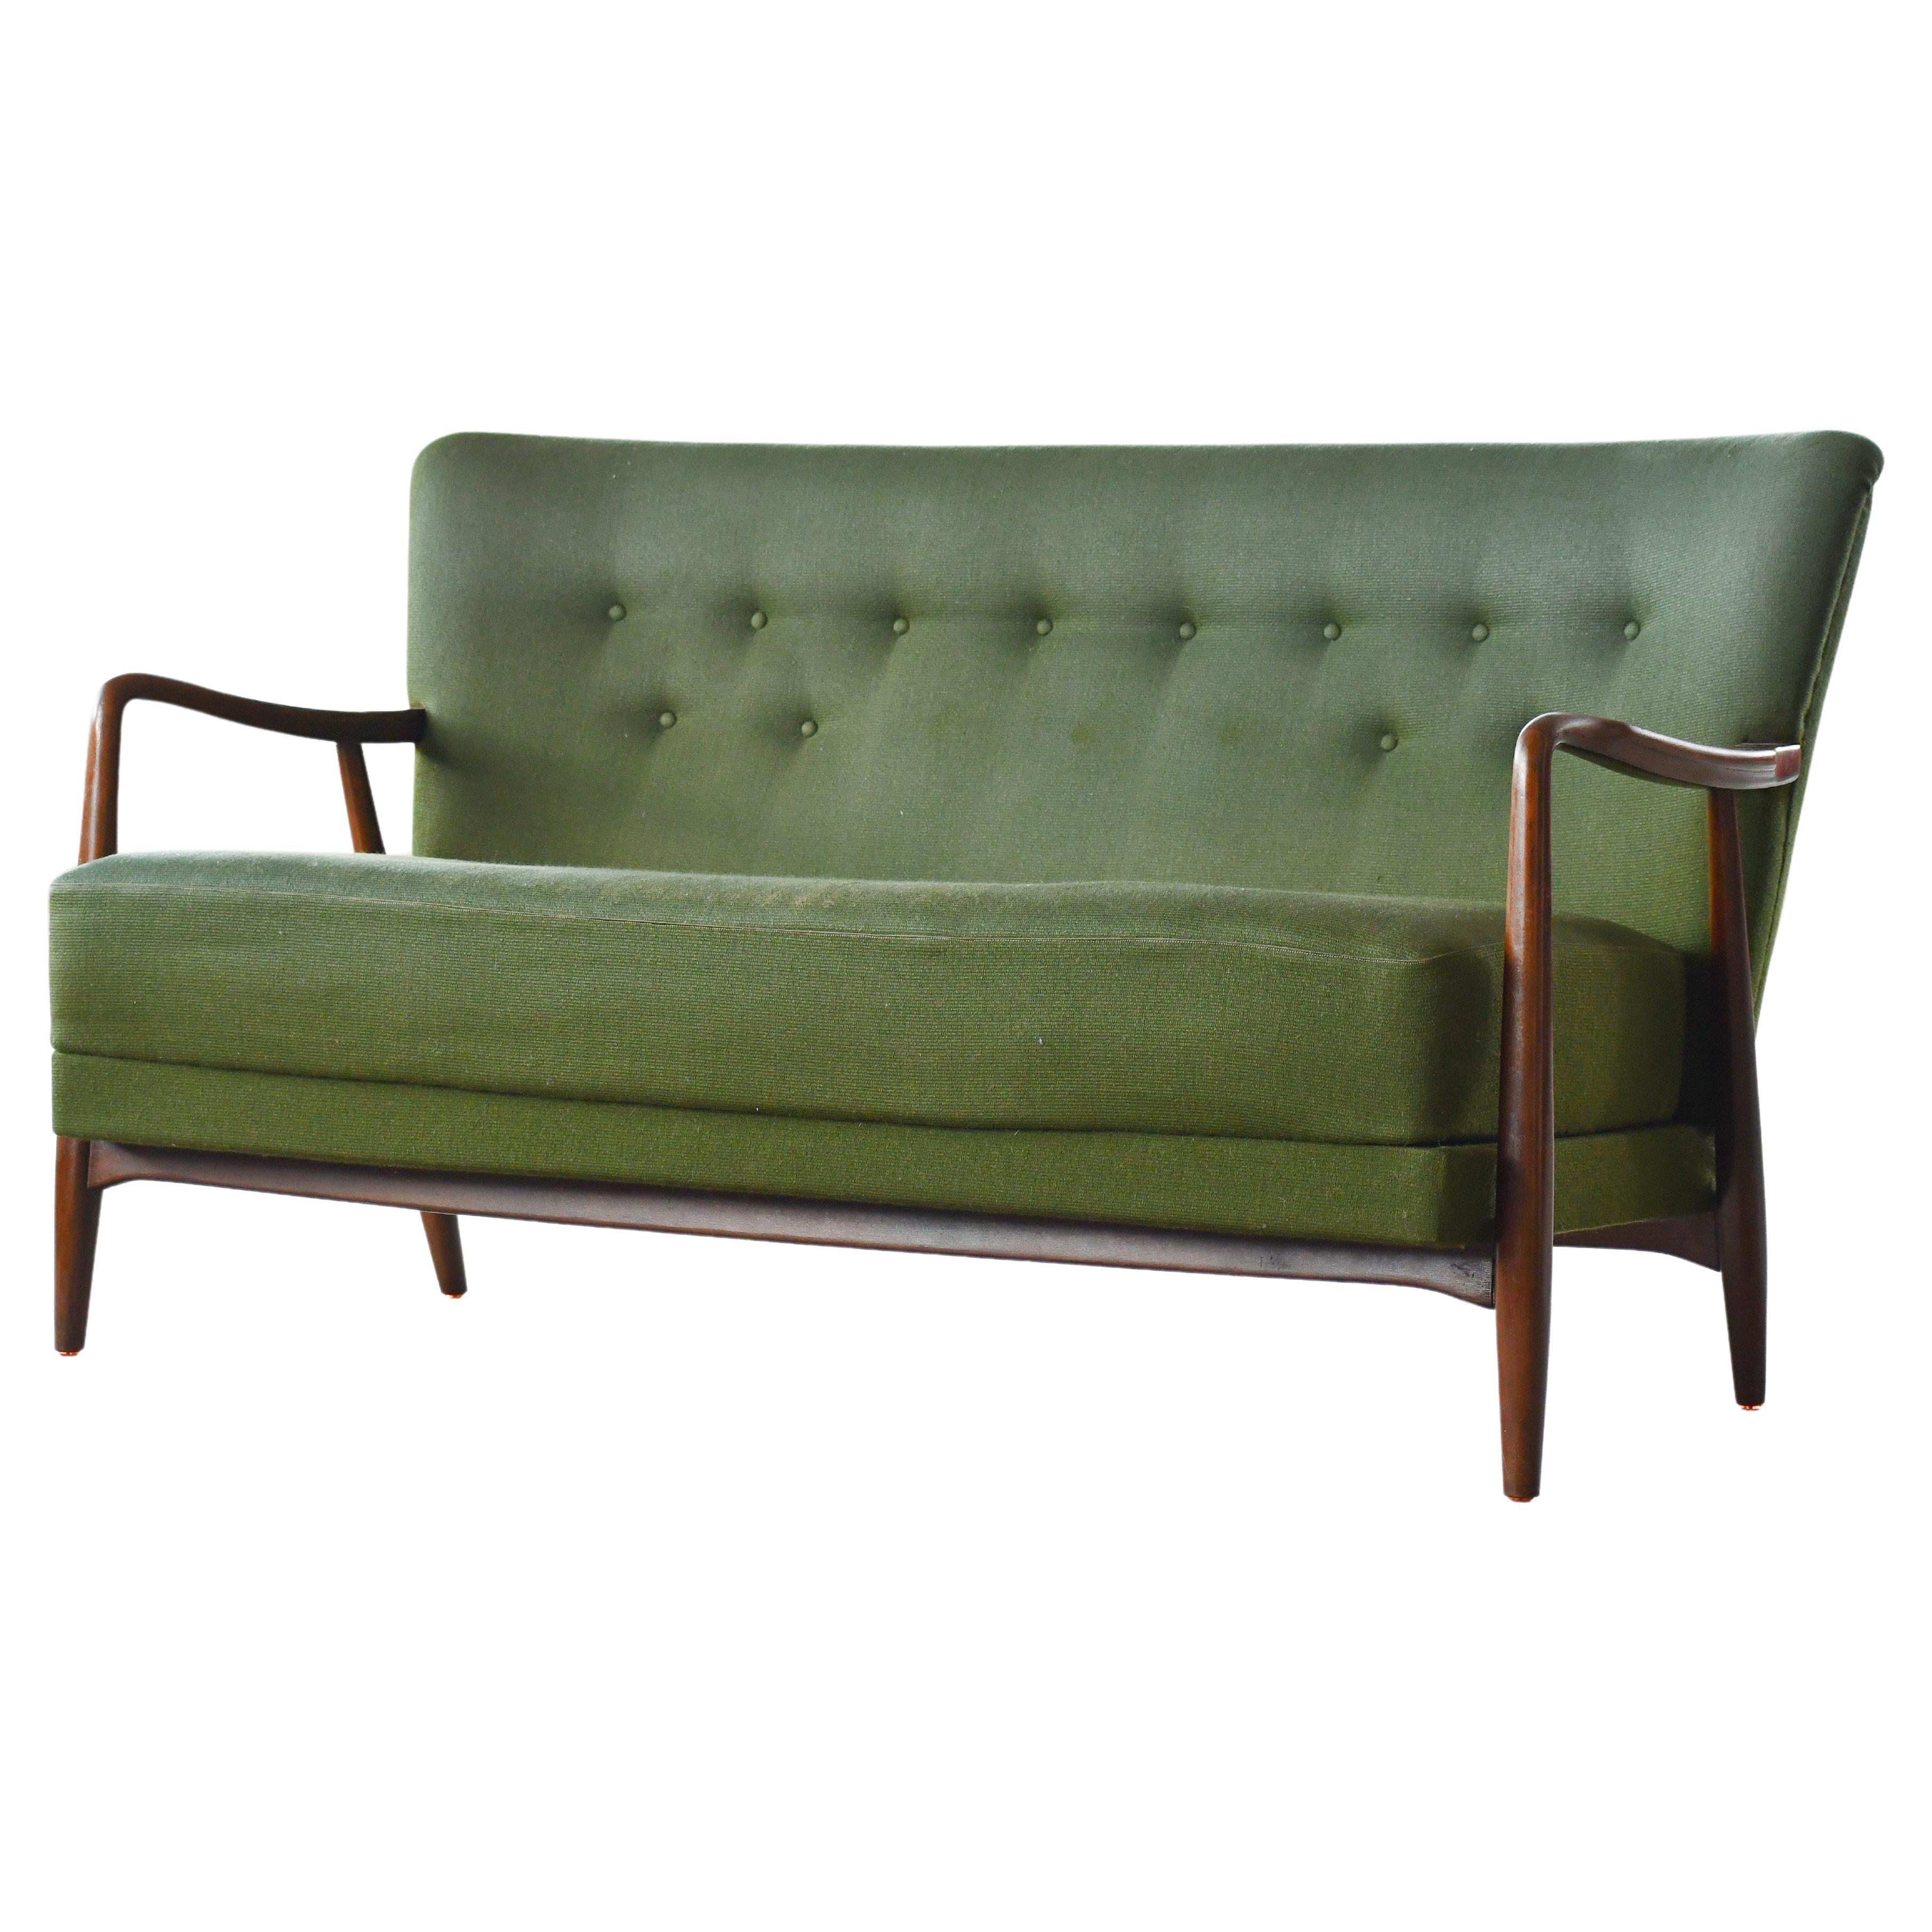 Danish Midcentury 1940s Sofa or Settee with Open Armrests by Alfred Christensen